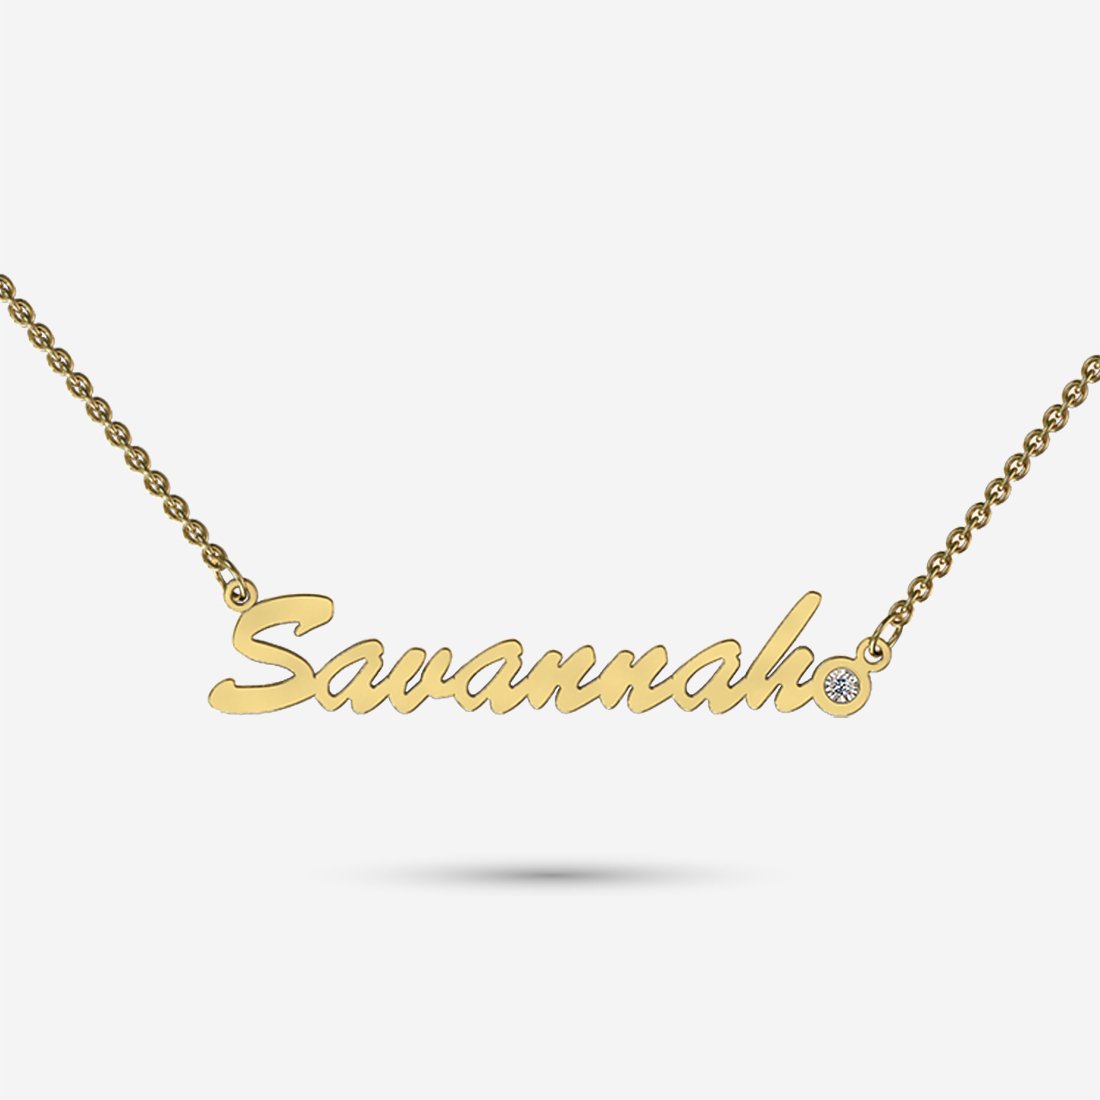 Classic name necklace in solid gold